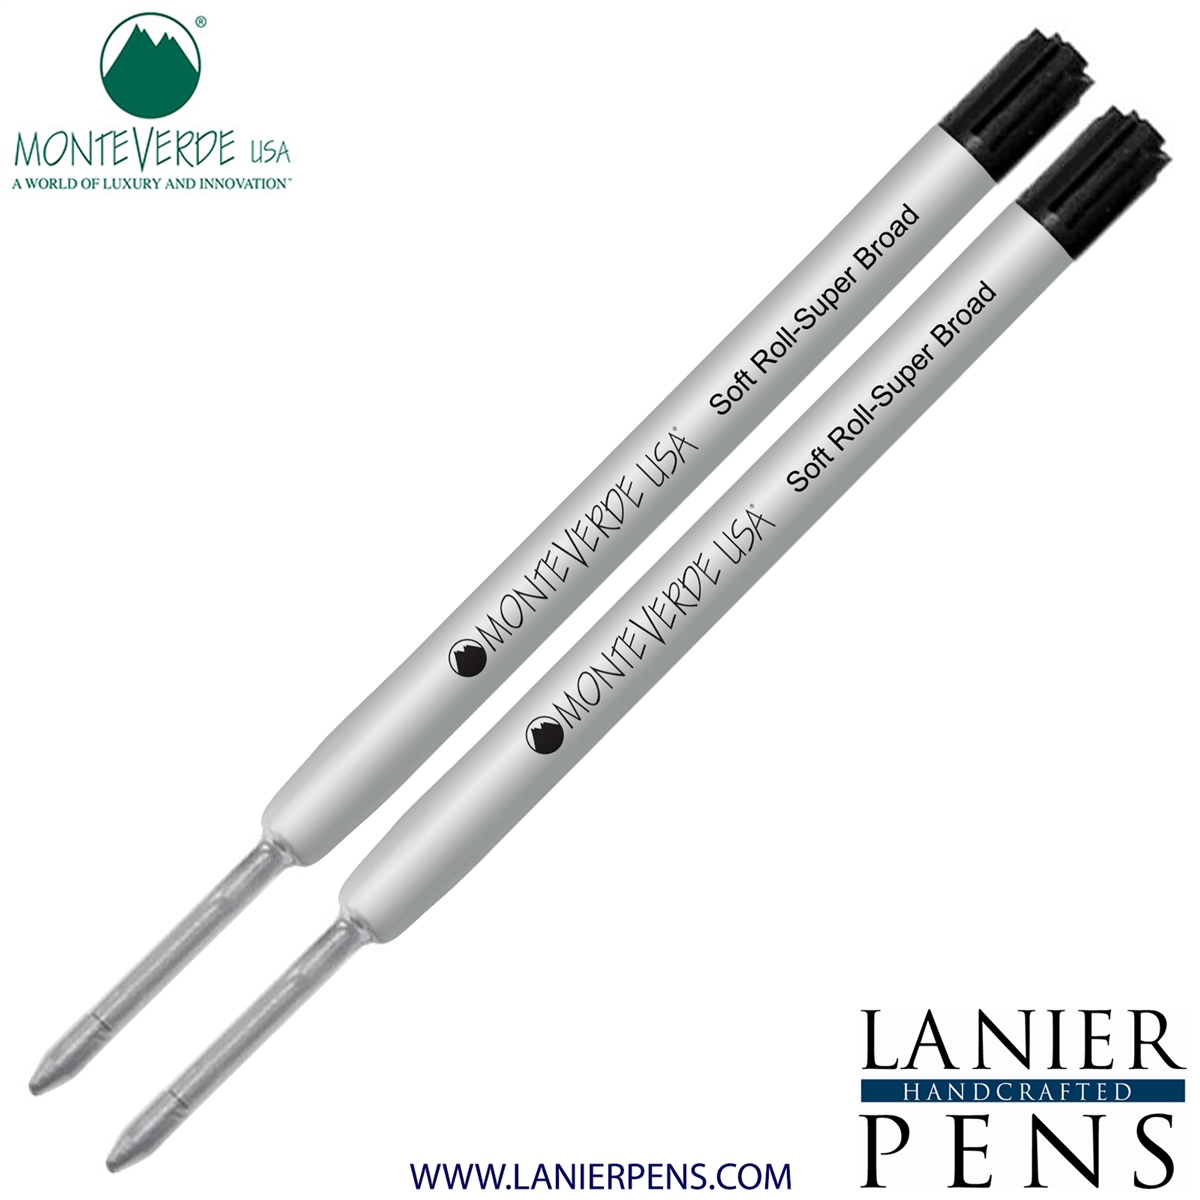 2 Pack - Monteverde Soft Roll Super Broad Ballpoint P15 Paste Ink Refill Compatible with most Parker Style Ballpoint Pens - Black (Super Broad Tip 1.4mm) - Lanier Pens